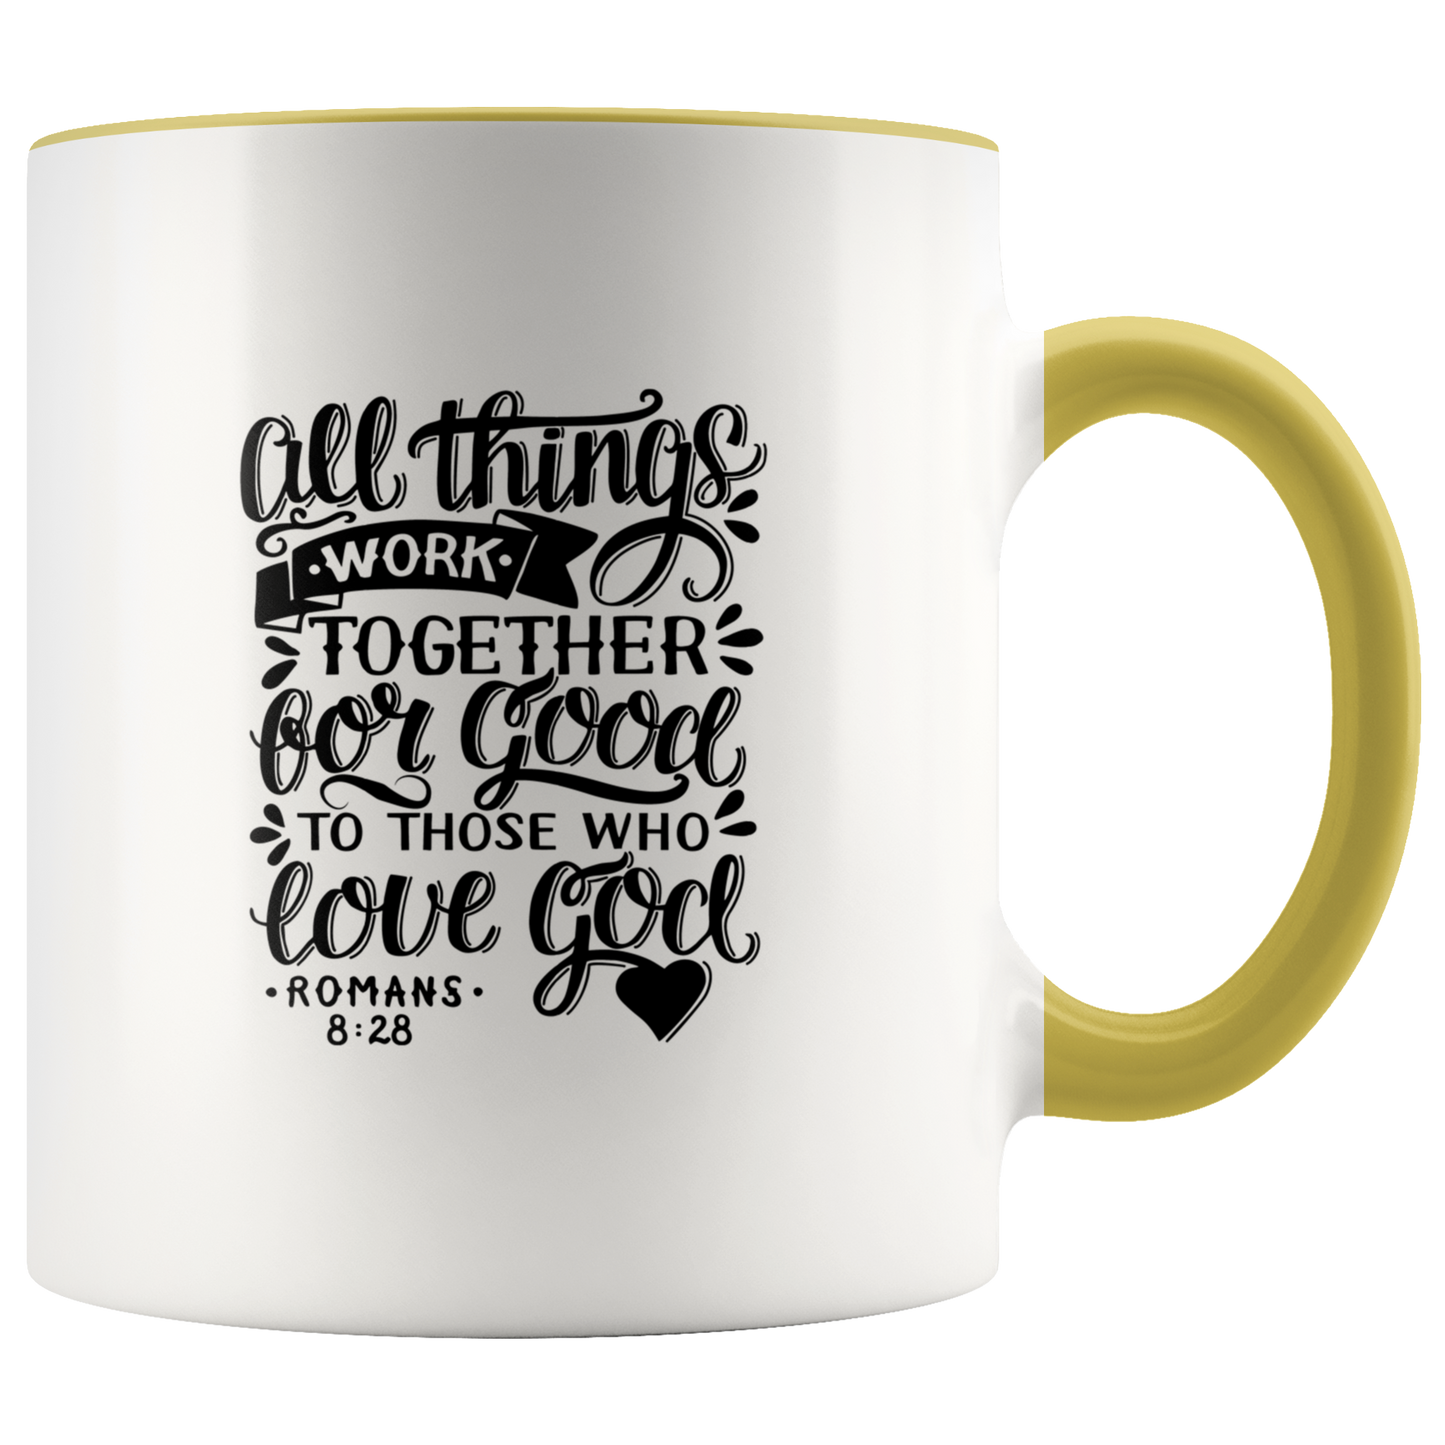 All Things Work Together For Good To Those Who Love God, Romans 8:28 - Accent Mug yellow